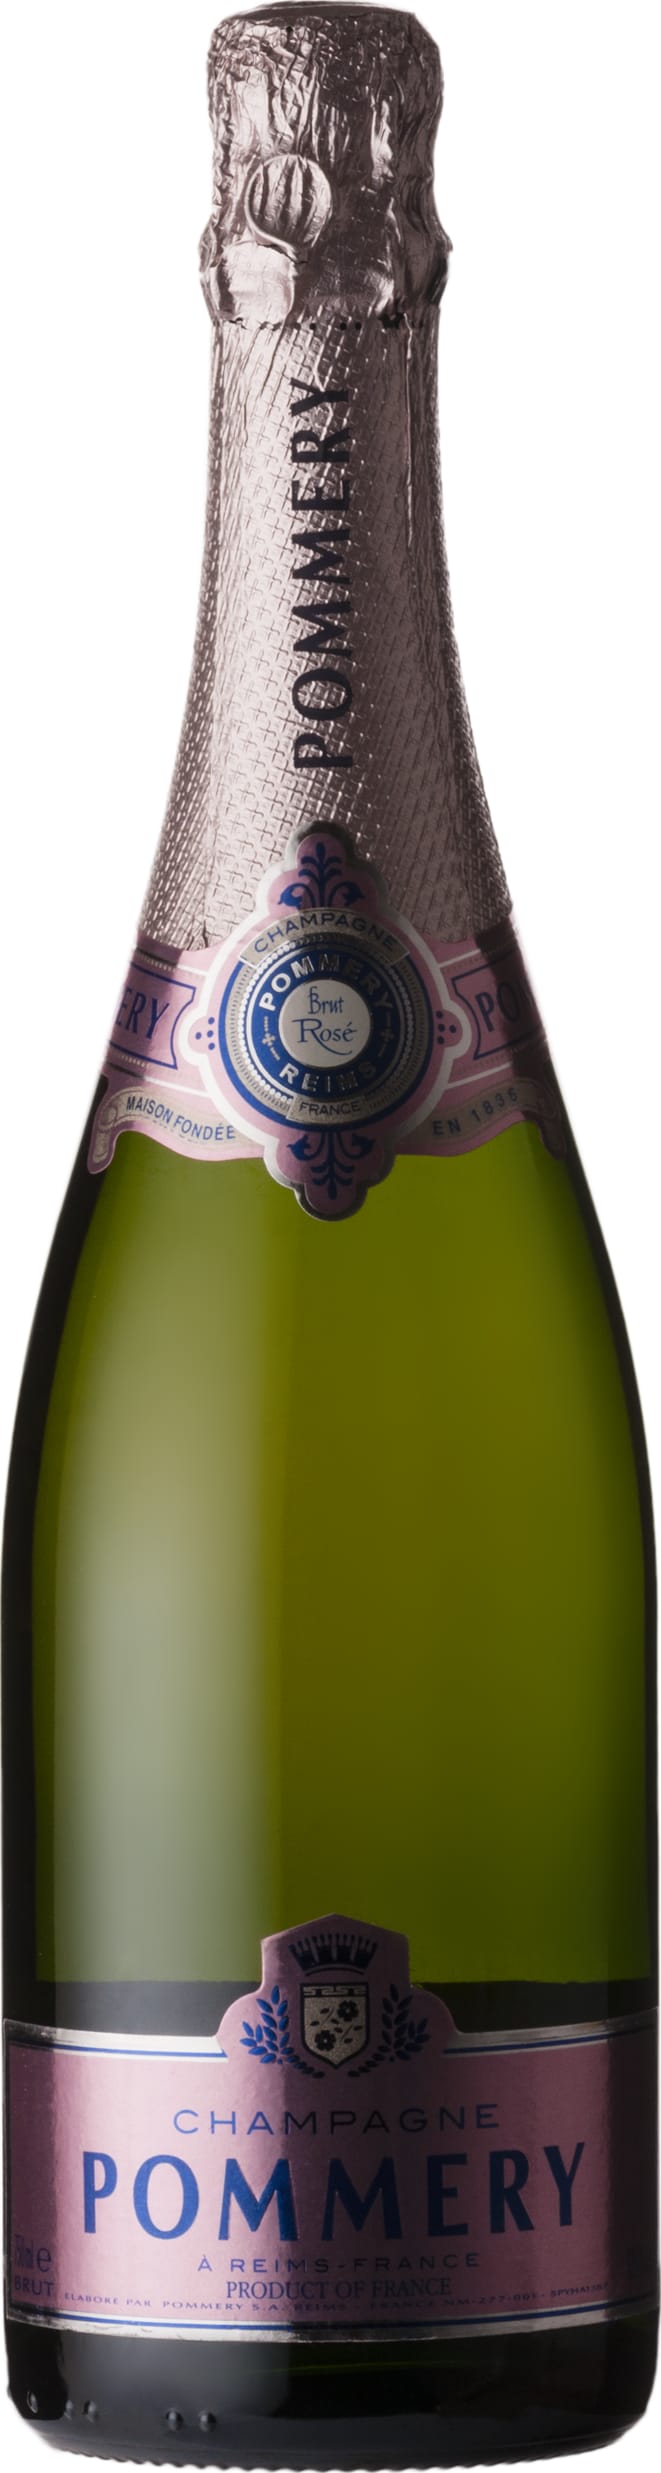 Champagne Pommery Brut Rose 75cl NV - Buy Champagne Pommery Wines from GREAT WINES DIRECT wine shop